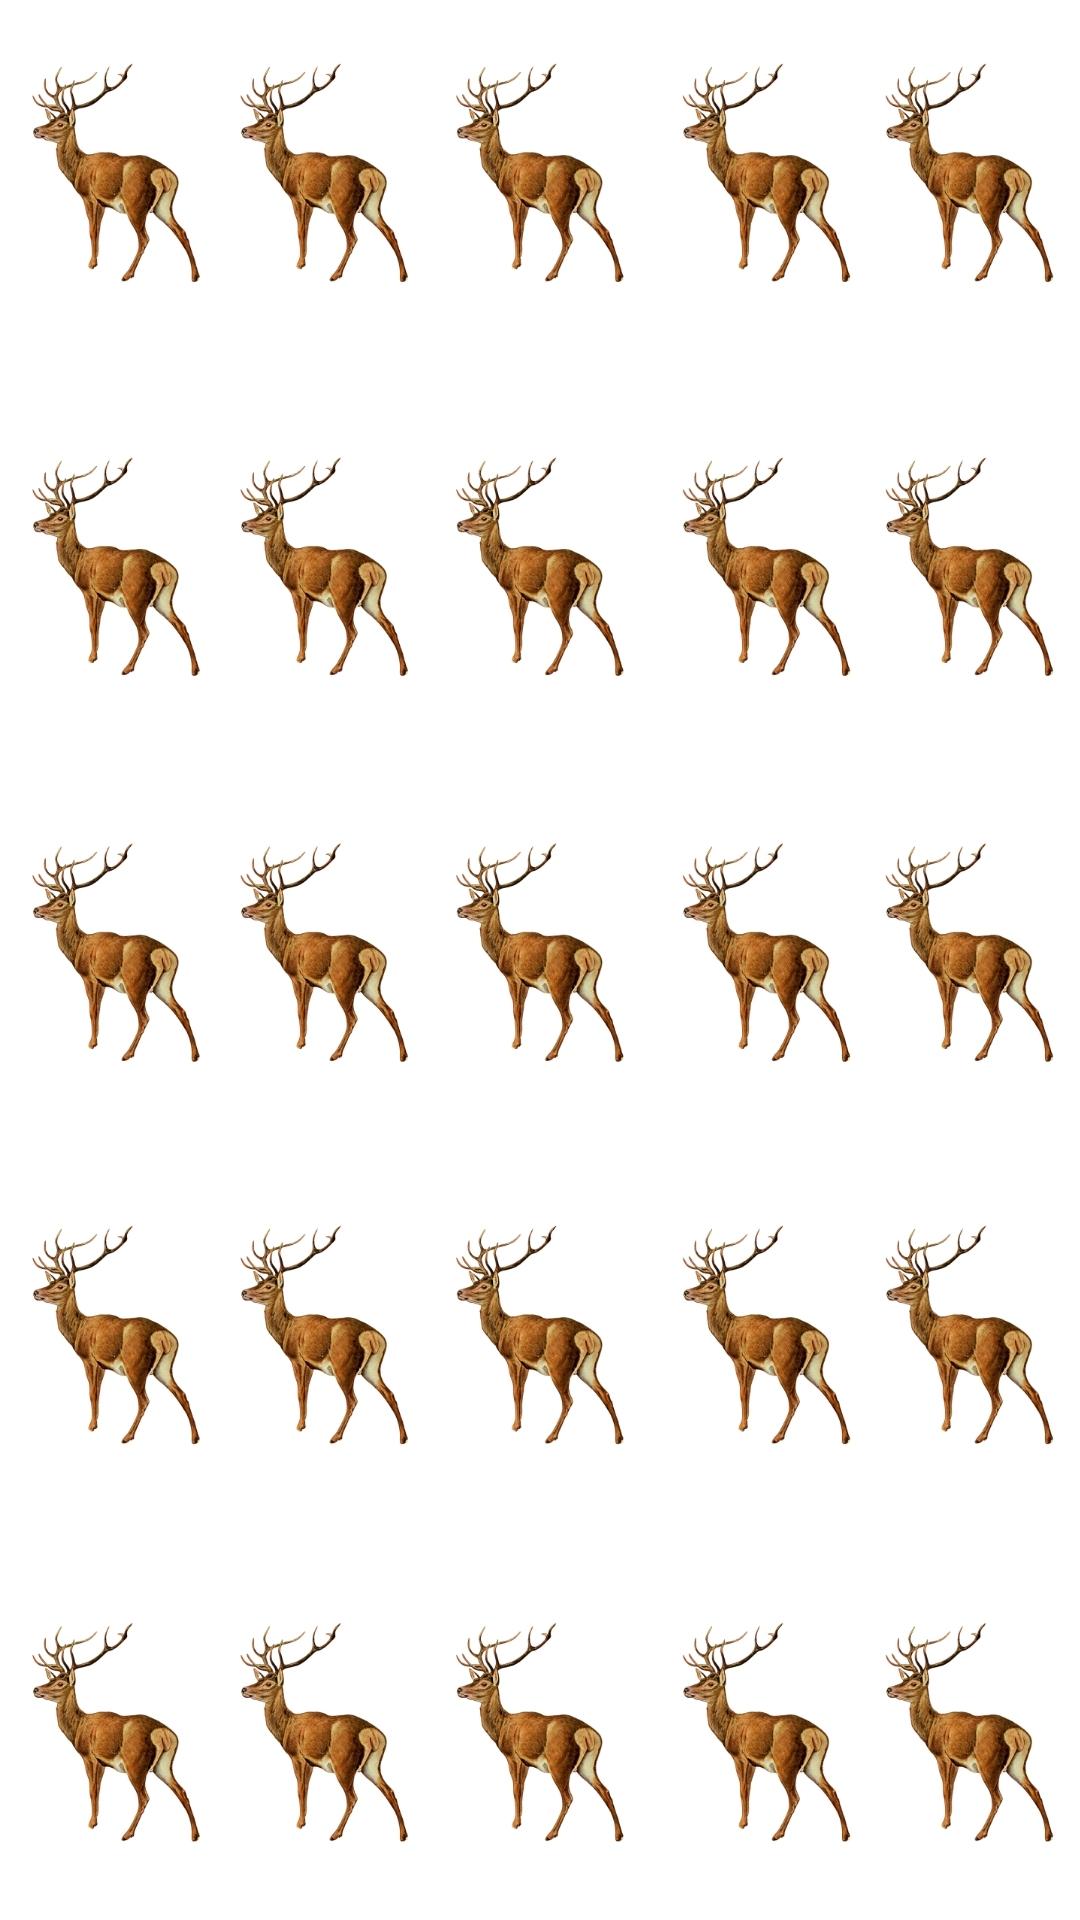 A repeating pattern of deer used as a holiday phone wallpaper background.